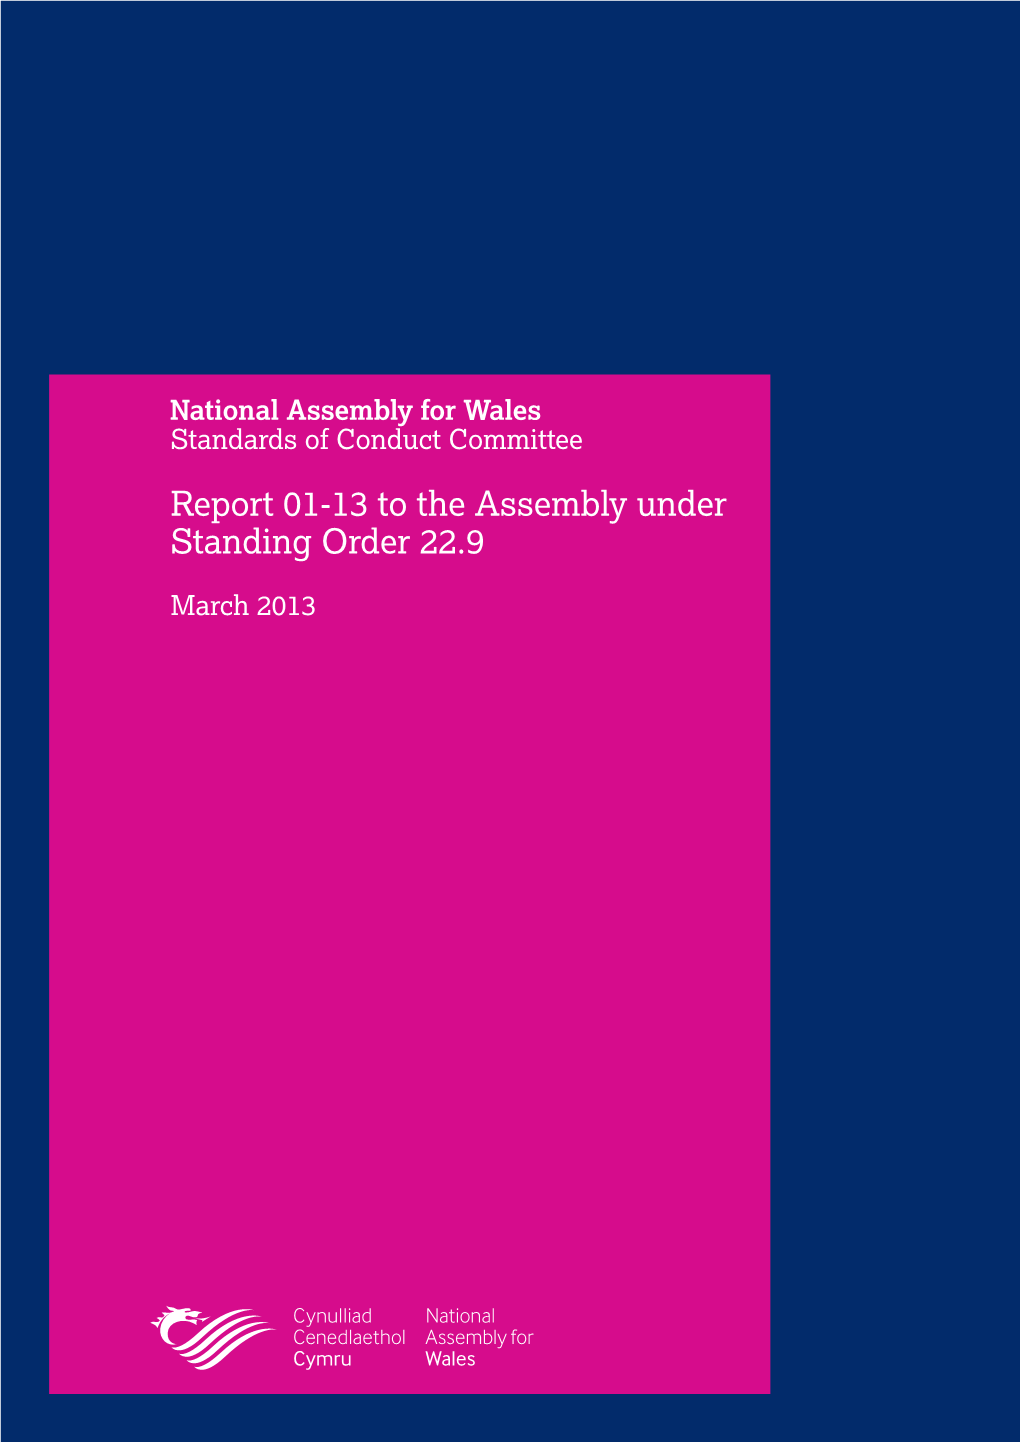 Report 01-13 to the Assembly Under Standing Order 22.9